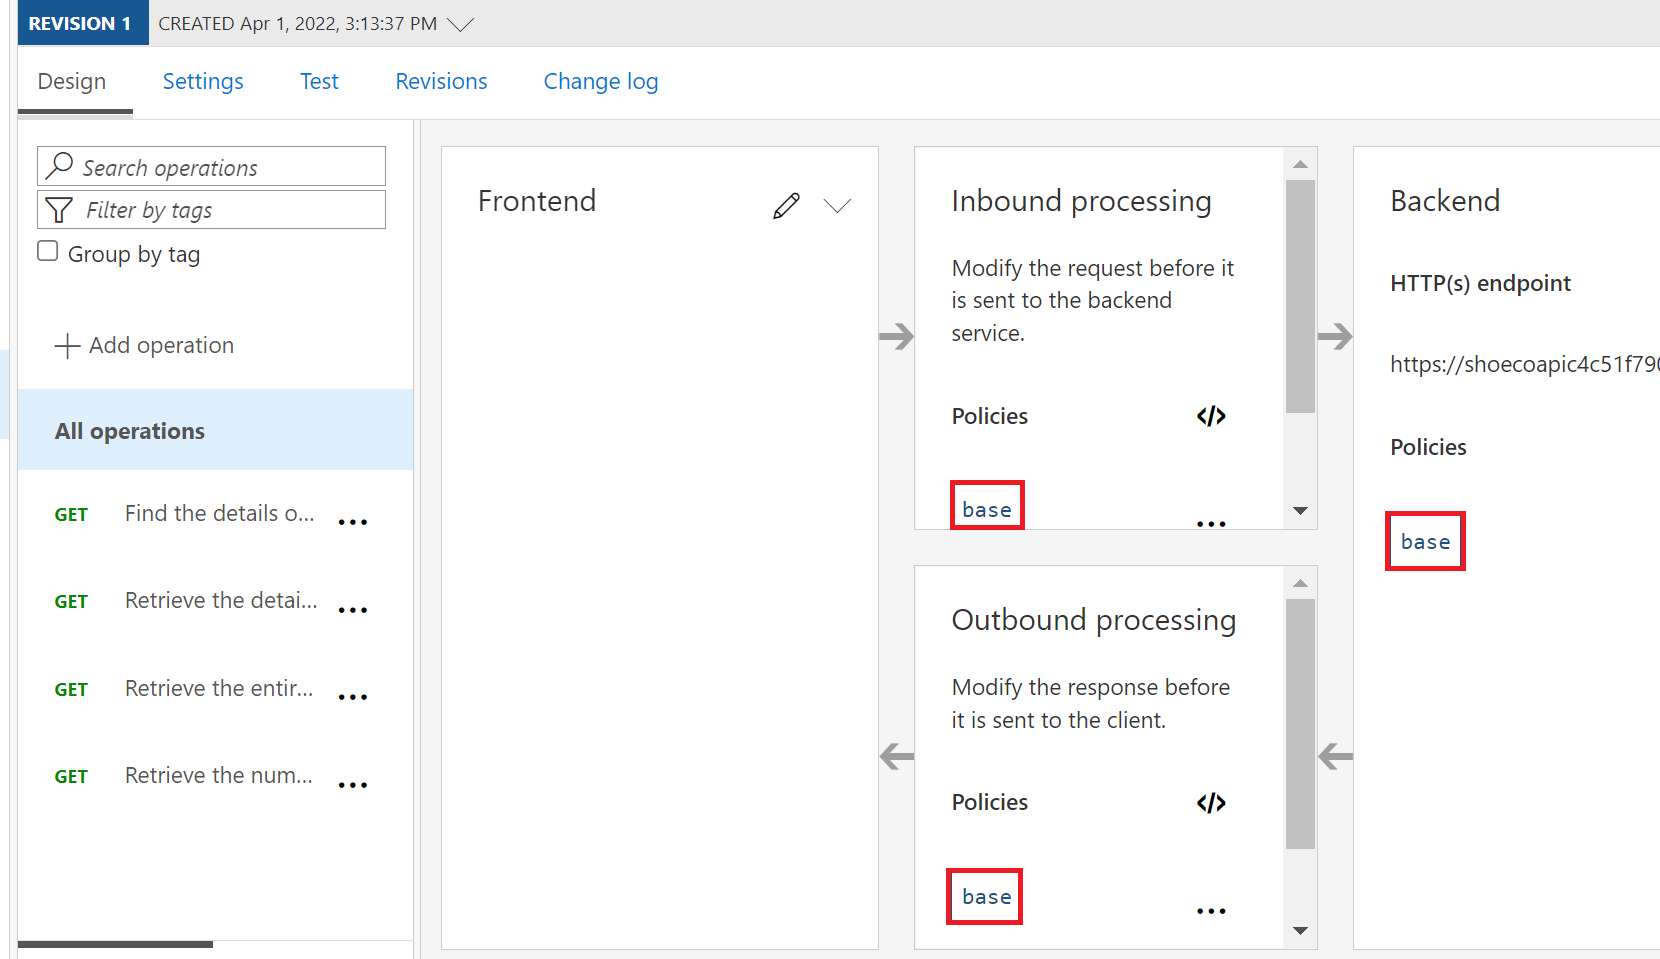 Screenshot of Azure portal showing API configuration for all operations with base policies highlighted for inbound, outbound, and backend sections.